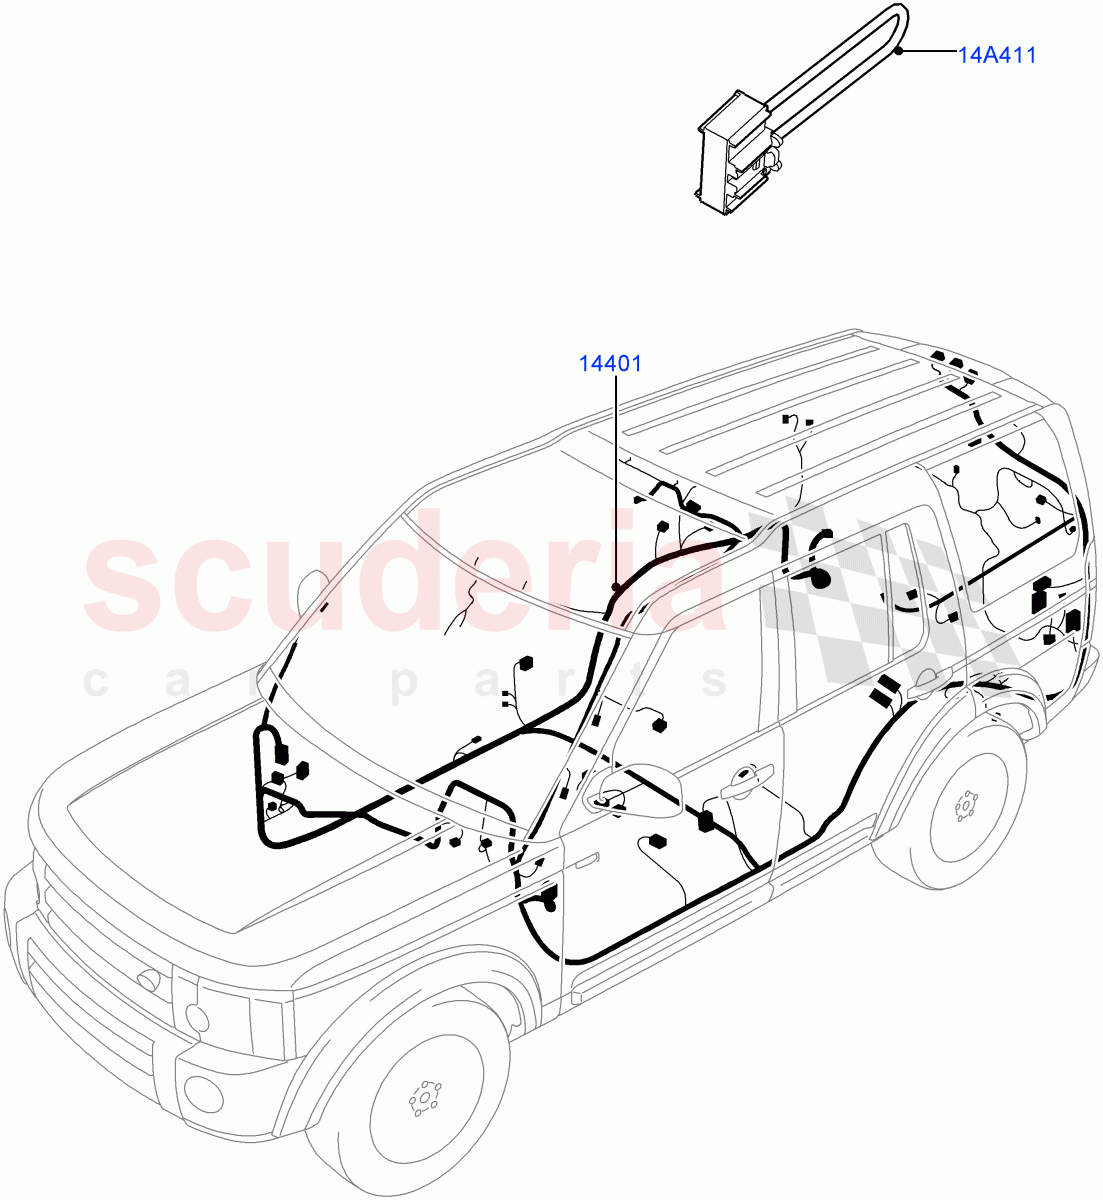 Electrical Wiring - Engine And Dash(Main Harness)((V)FROMCA000001,(V)TOFA999999) of Land Rover Land Rover Discovery 4 (2010-2016) [5.0 OHC SGDI NA V8 Petrol]